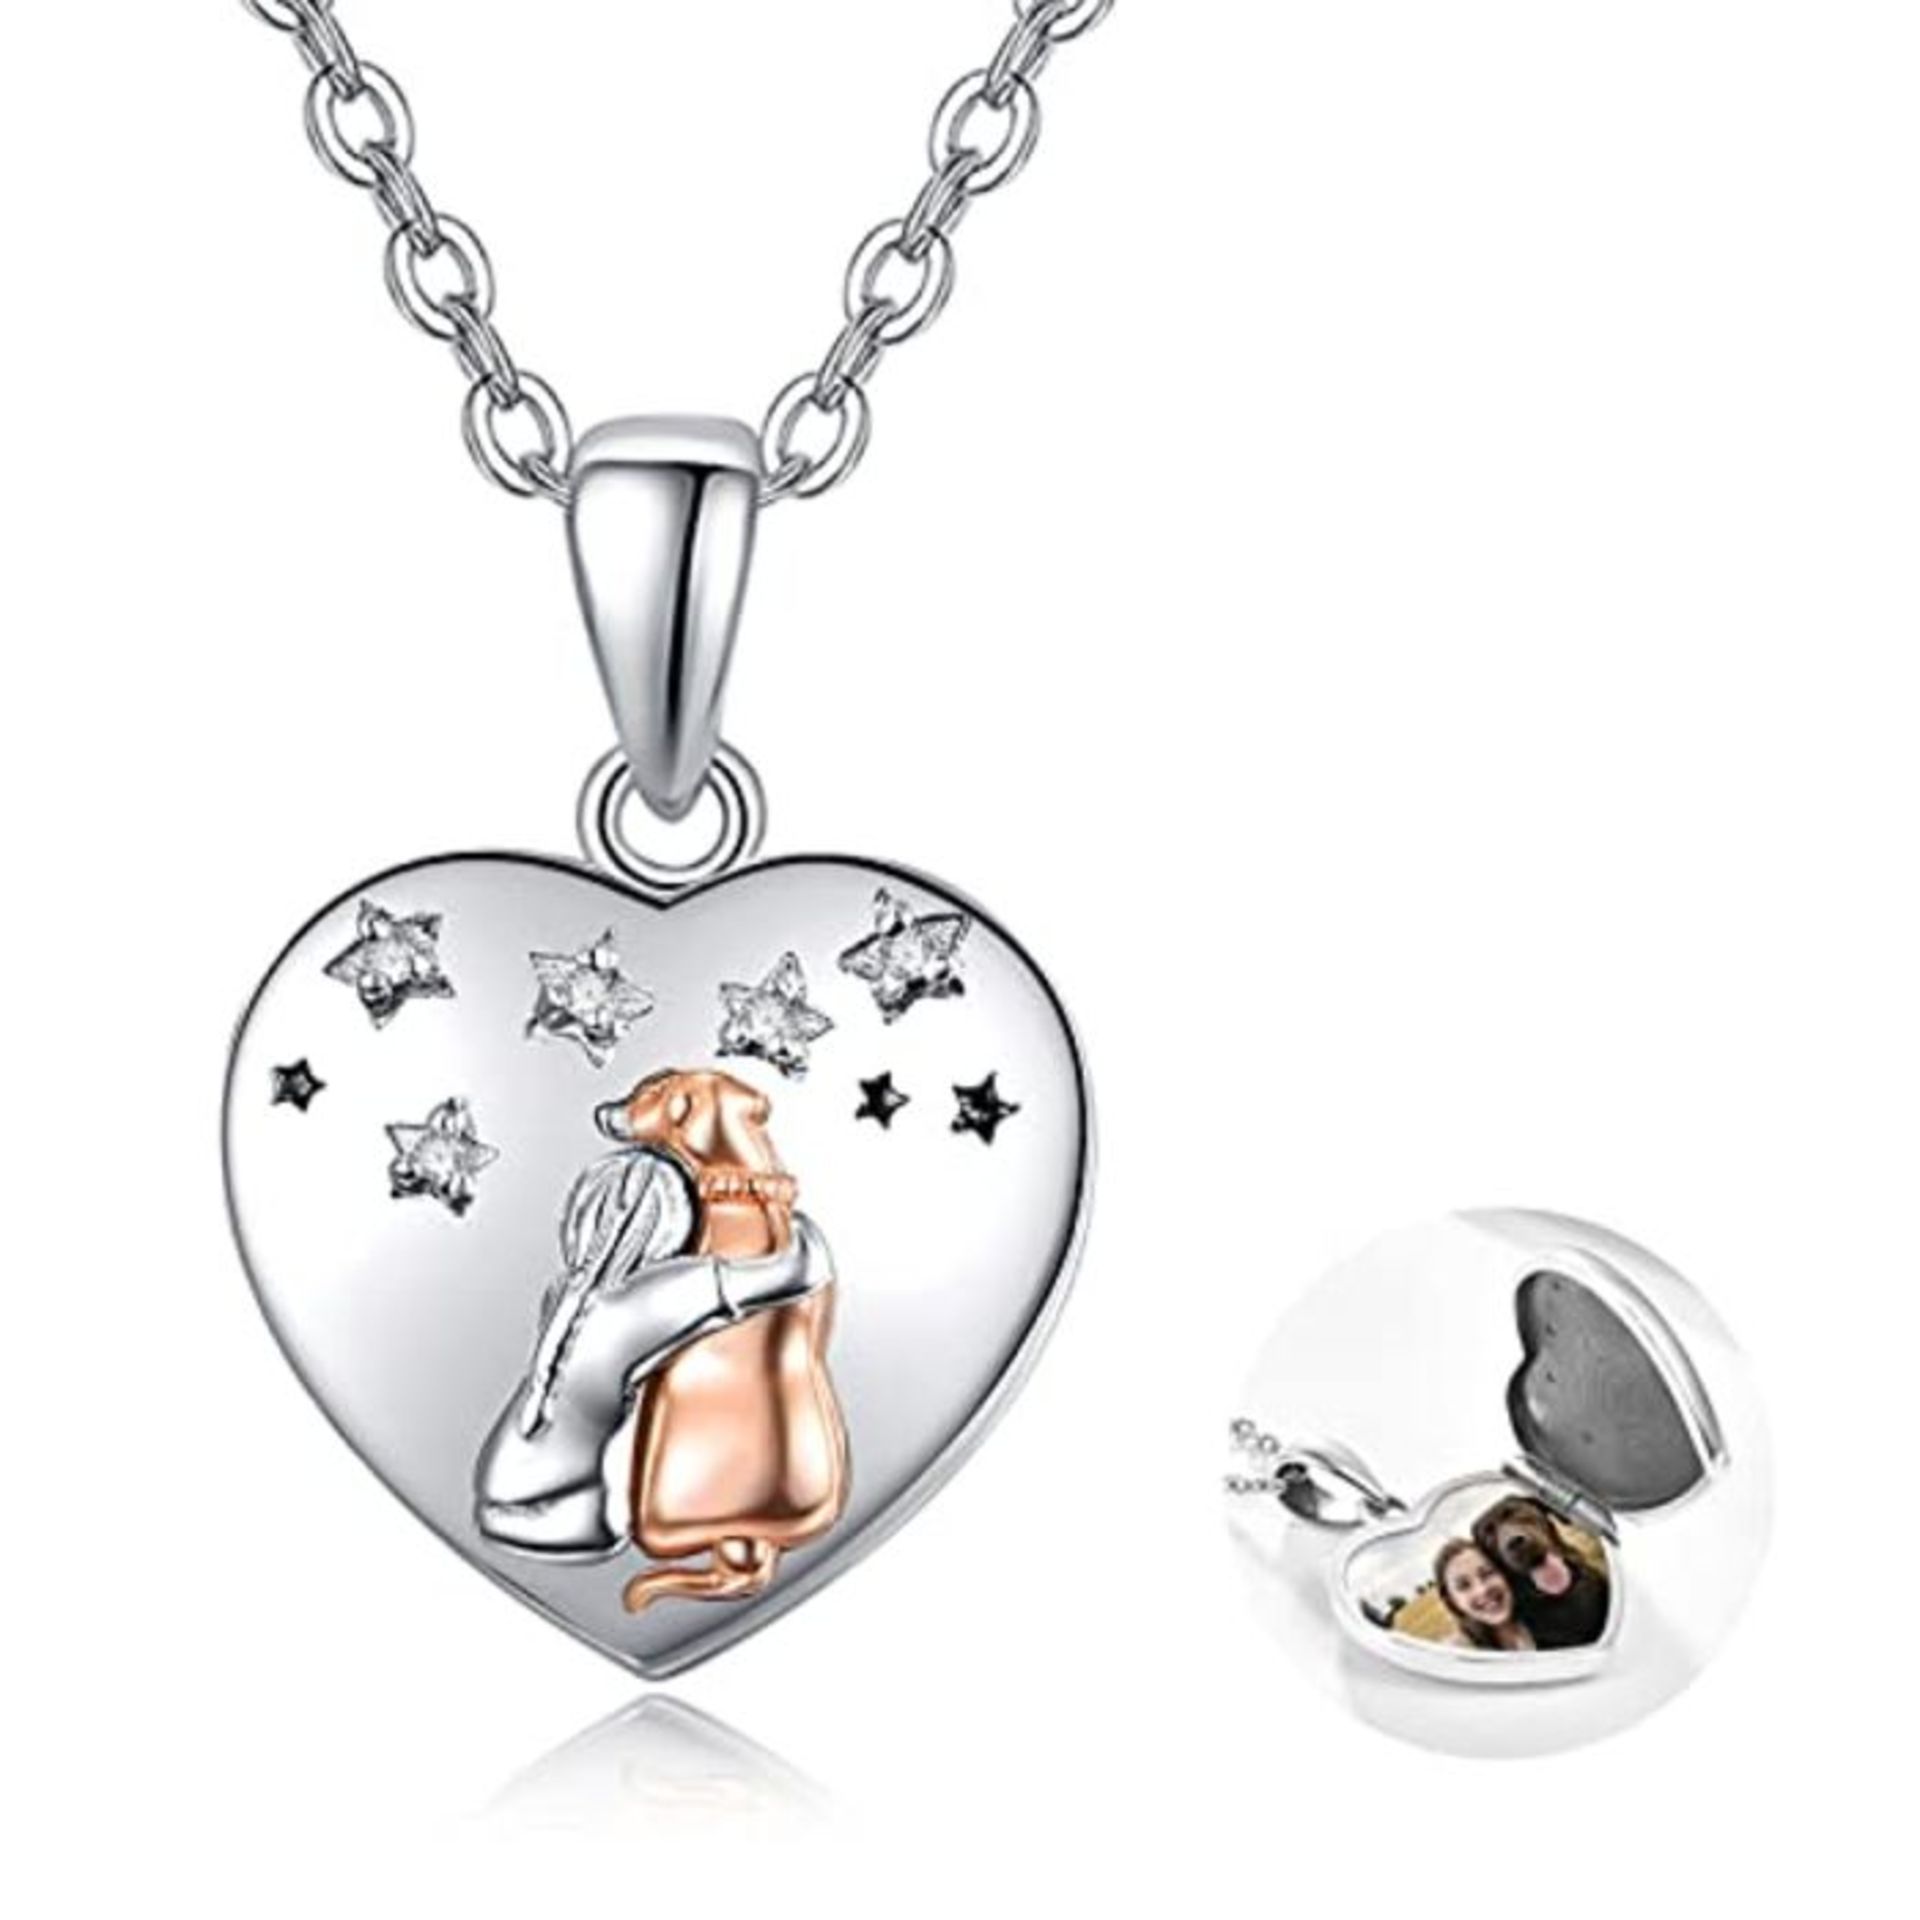 Dog and girl necklace